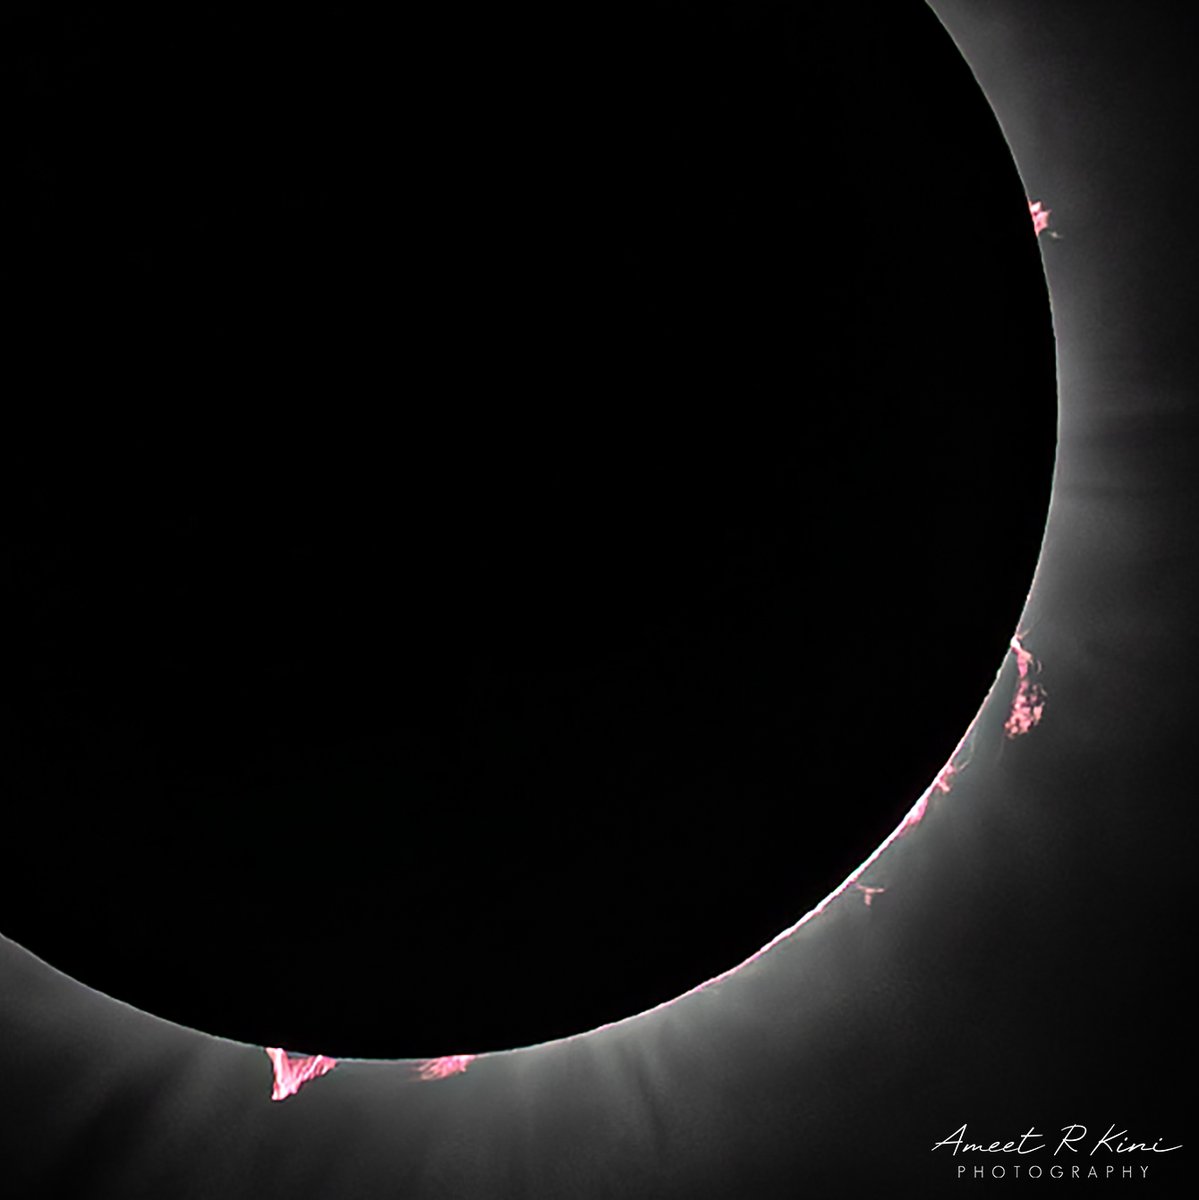 The incredibly intricate and beautiful solar prominences & flares from Monday's eclipse! The large prominence at the bottom left was visible with the naked eye at totality from our site in Indy! Canon R6, RF100-500 at 500mm, f/7.1, ISO 400, 1/6400s #Eclipse2024 #SolarEclipse2024